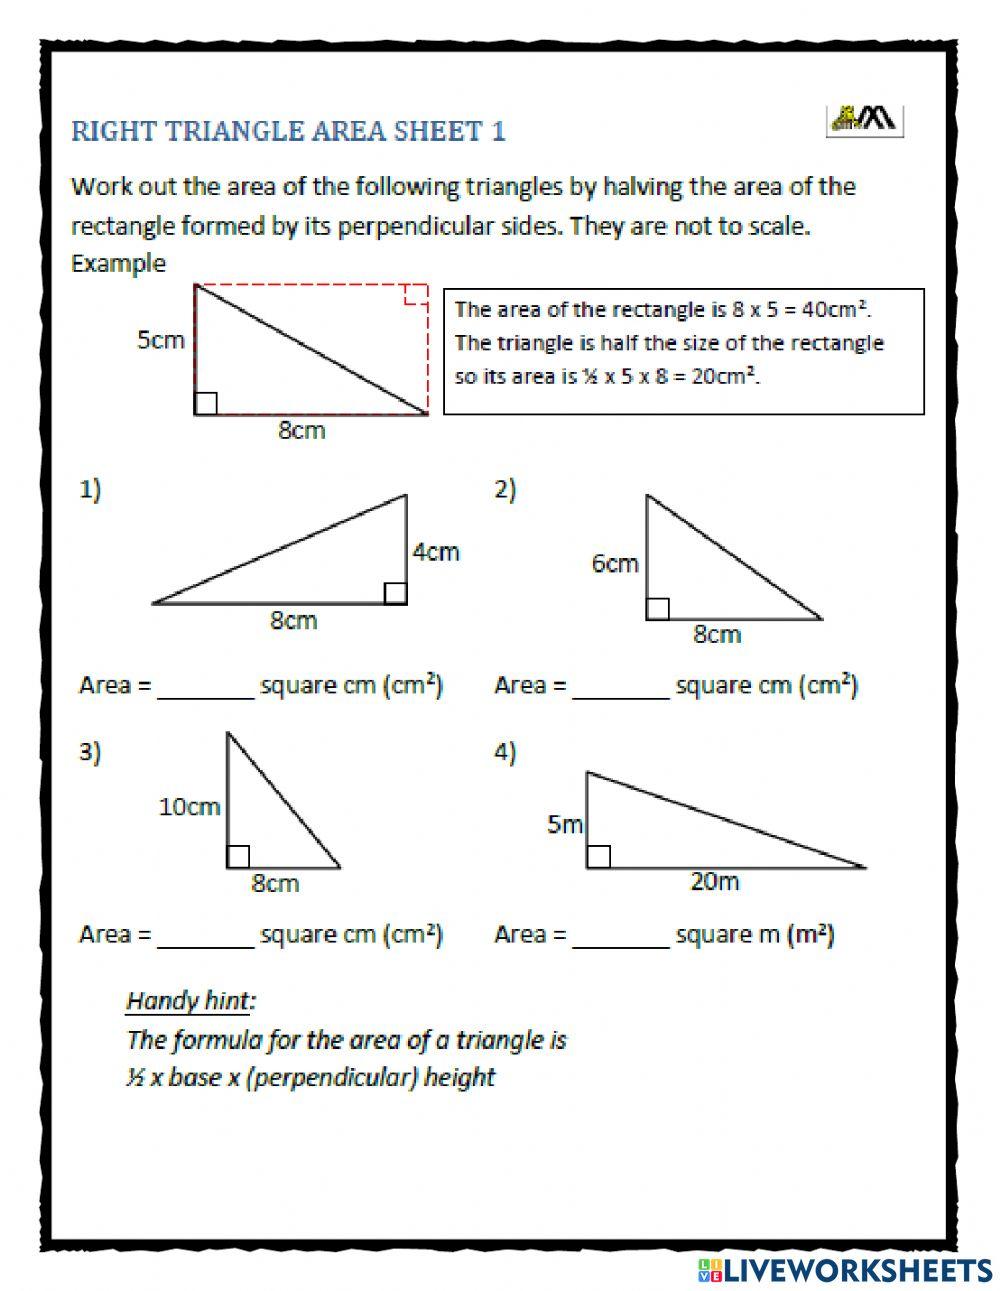 Find the area of a triangle